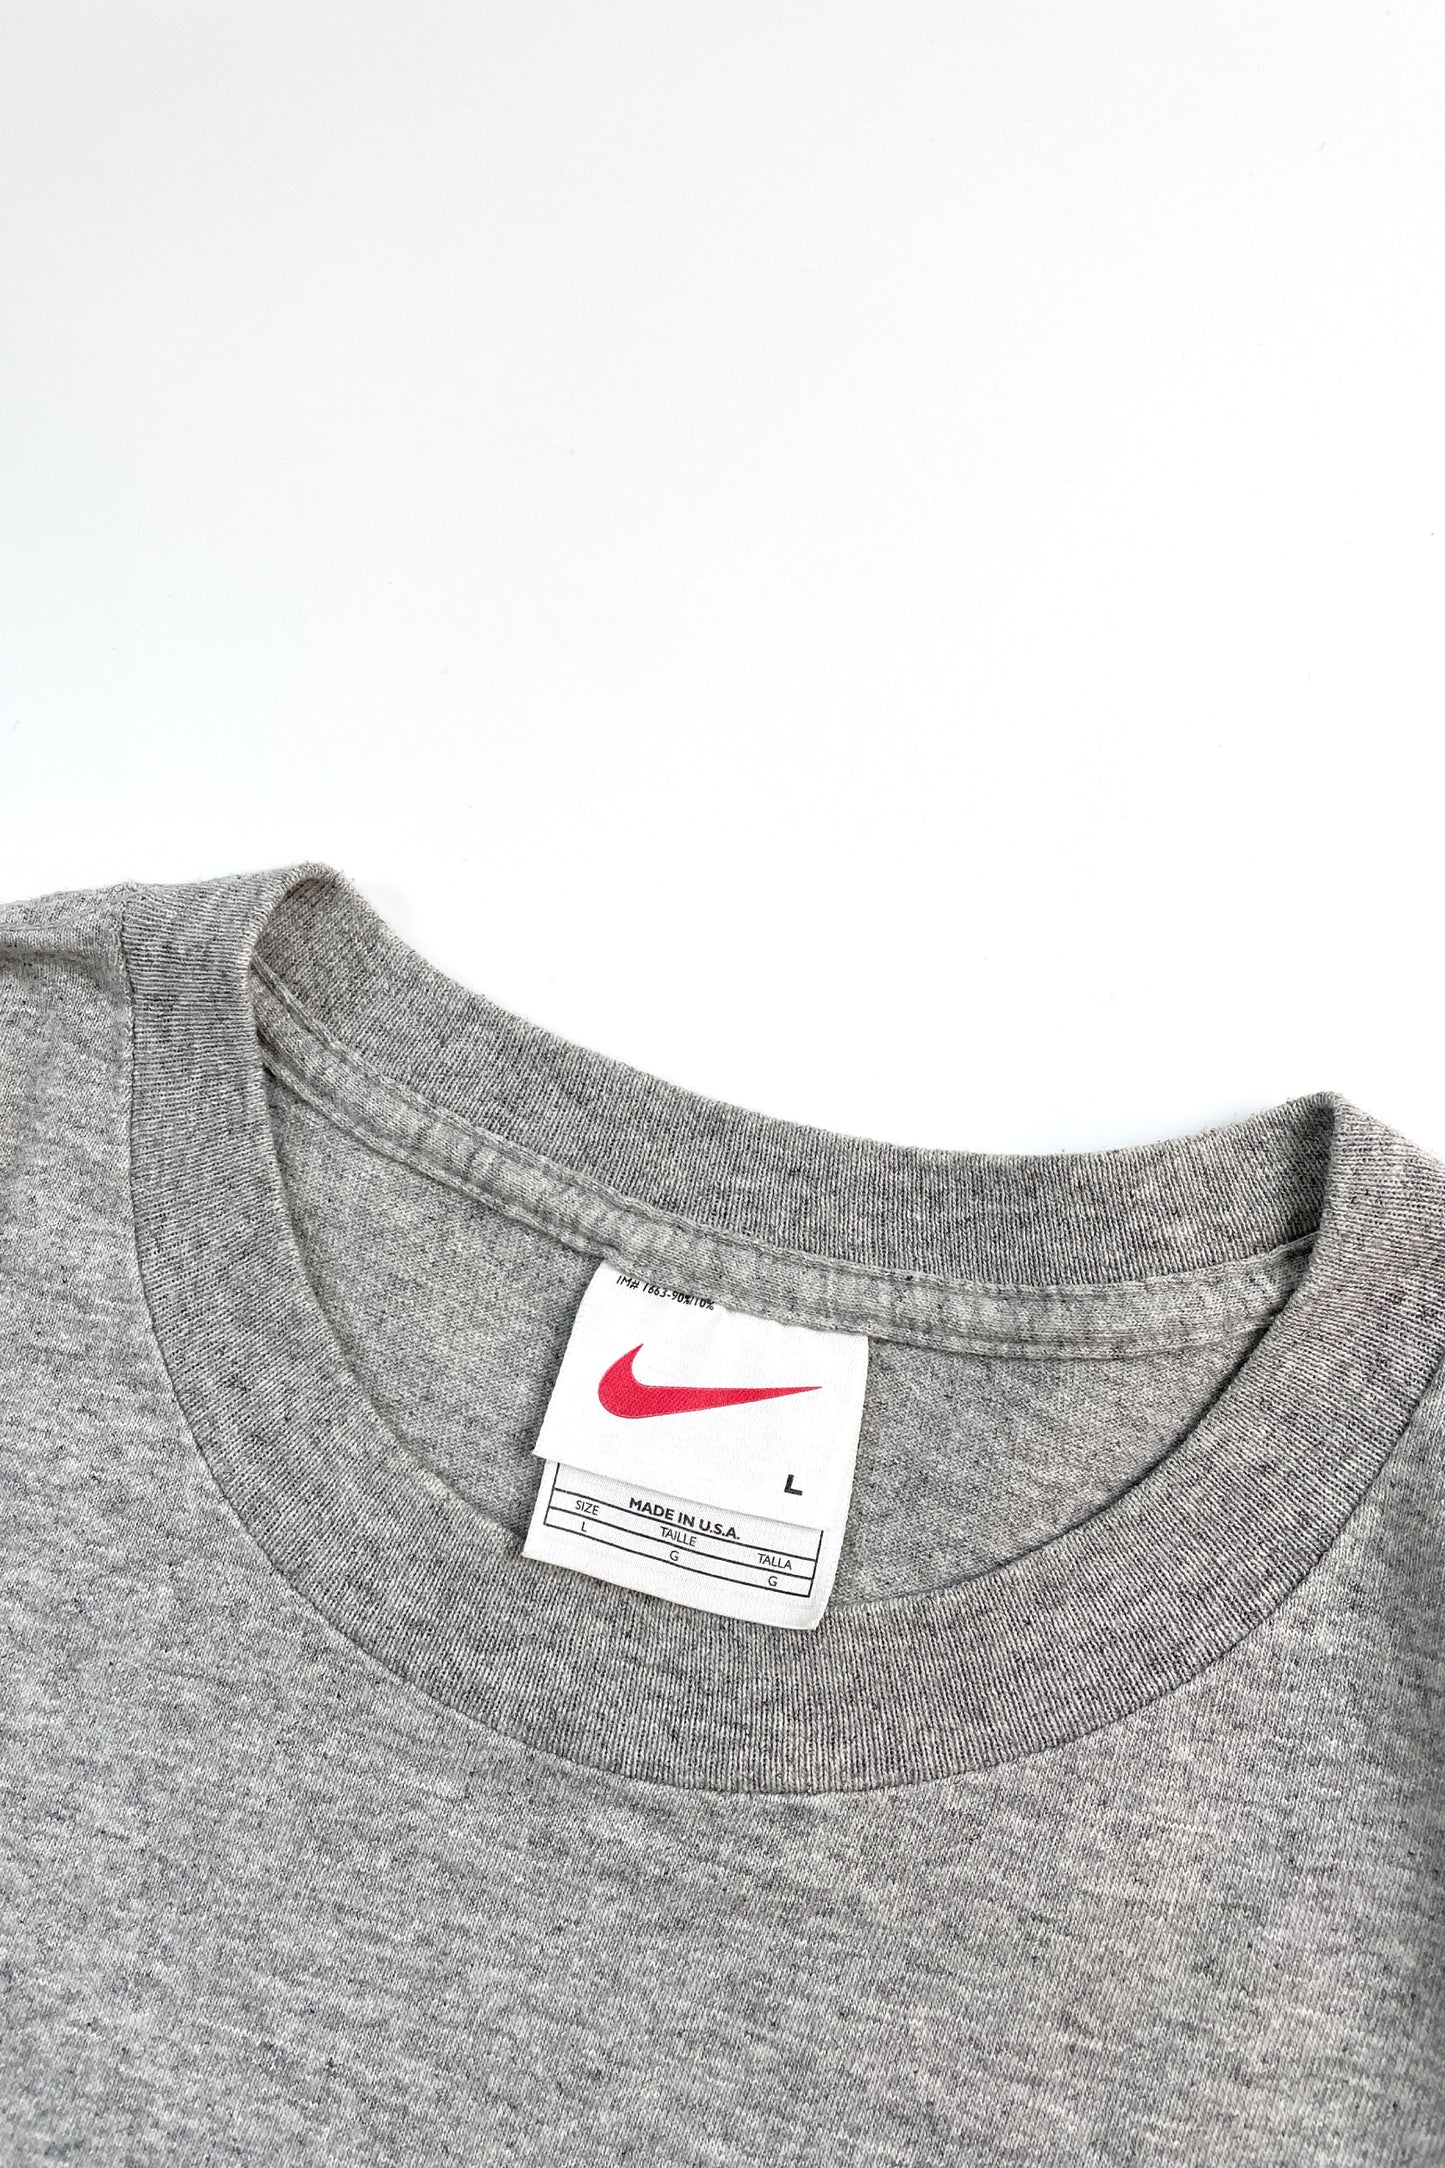 00's Made in USA NIKE T-shirt